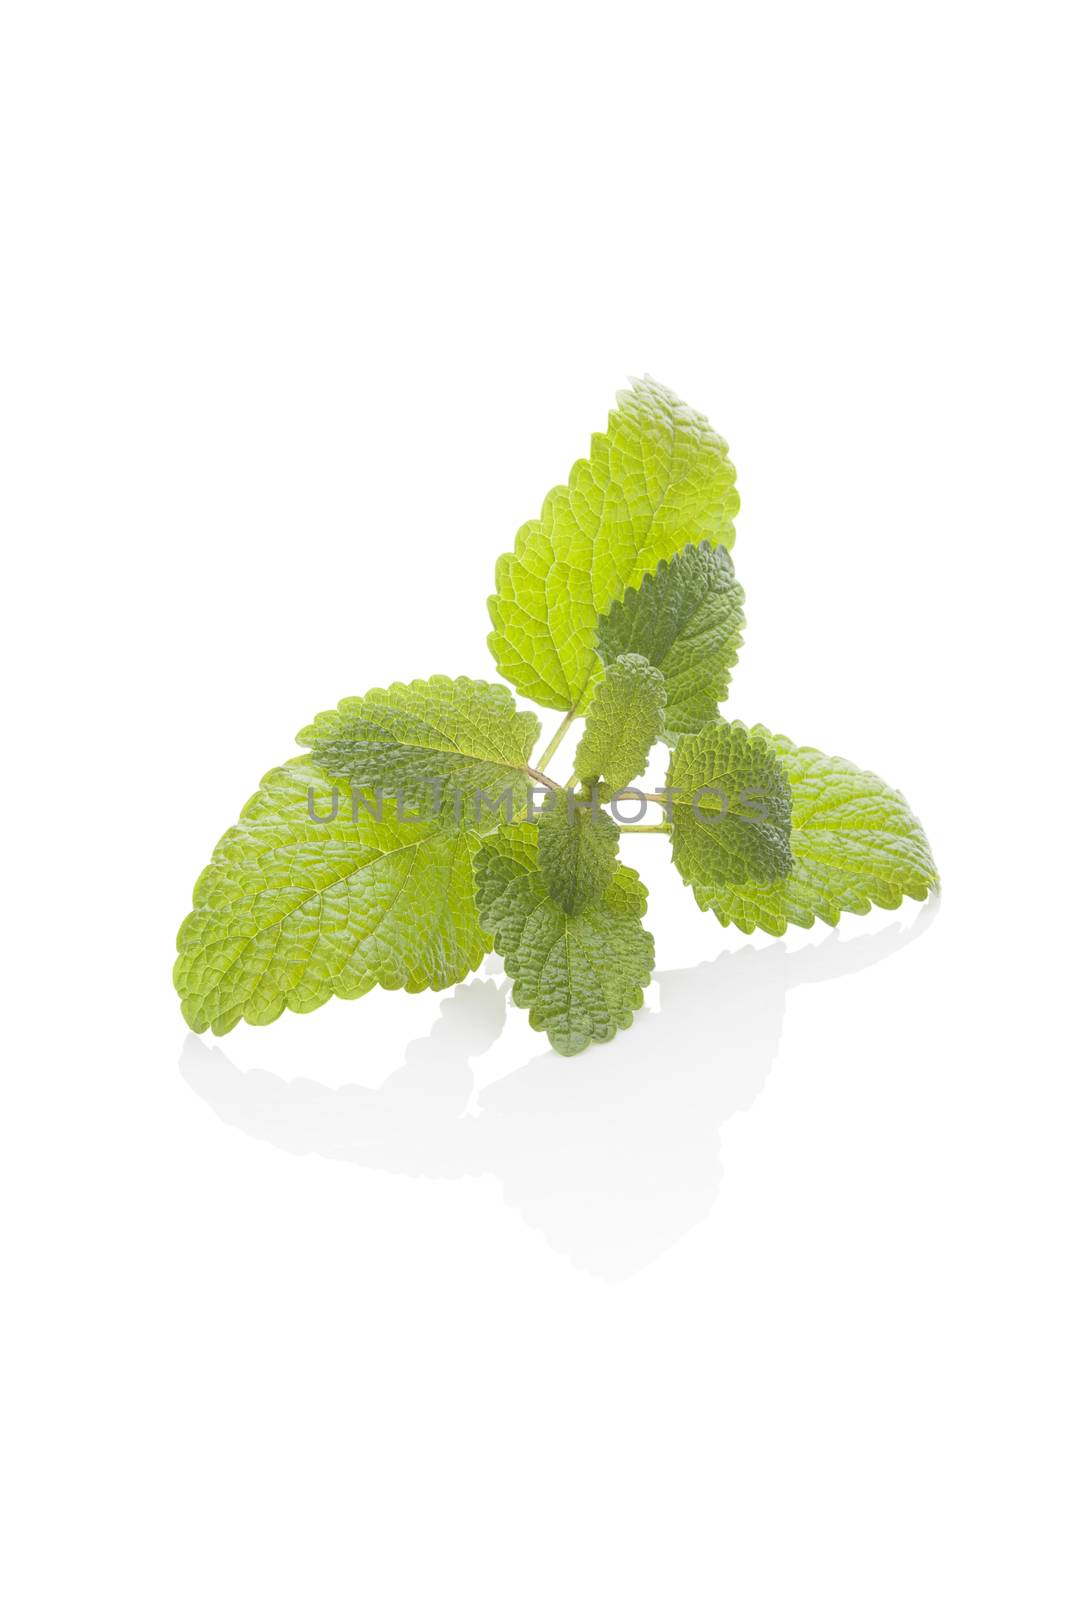 Melissa, balm mint herb isolated on white background. Culinary aromatic herb.